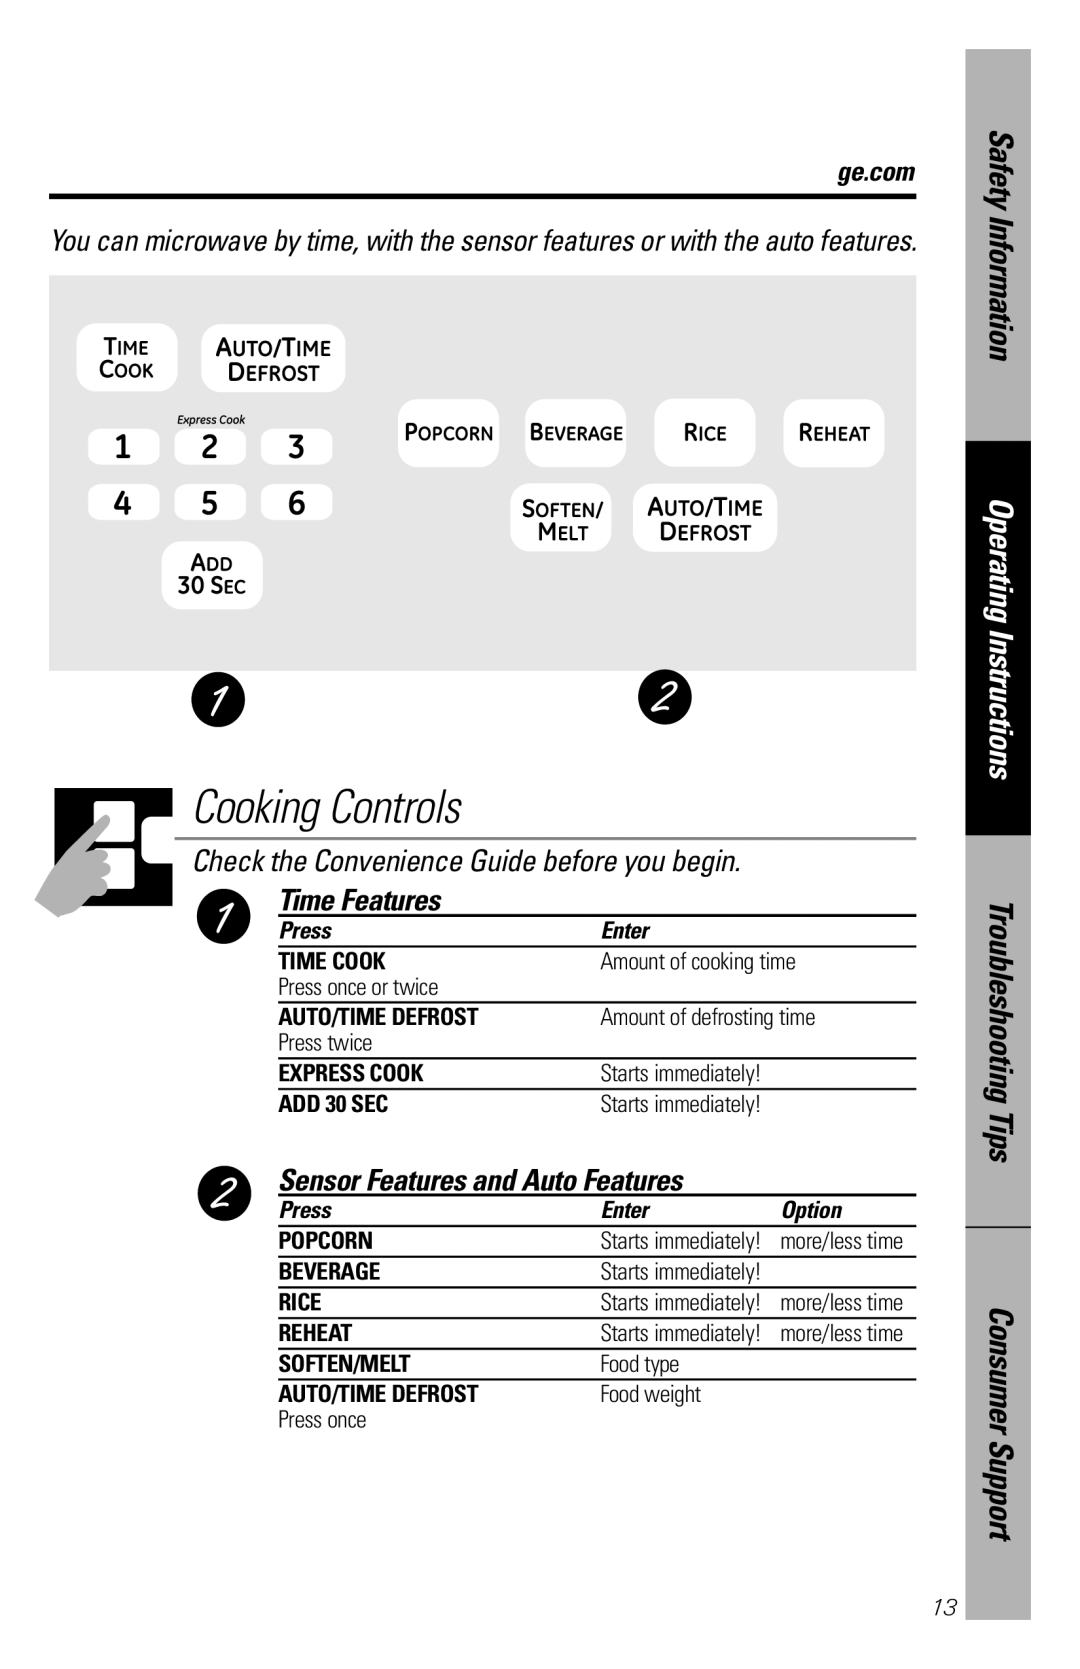 GE JES1358 Cooking Controls, Check the Convenience Guide before you begin, Time Features, Safety Information, Time Cook 